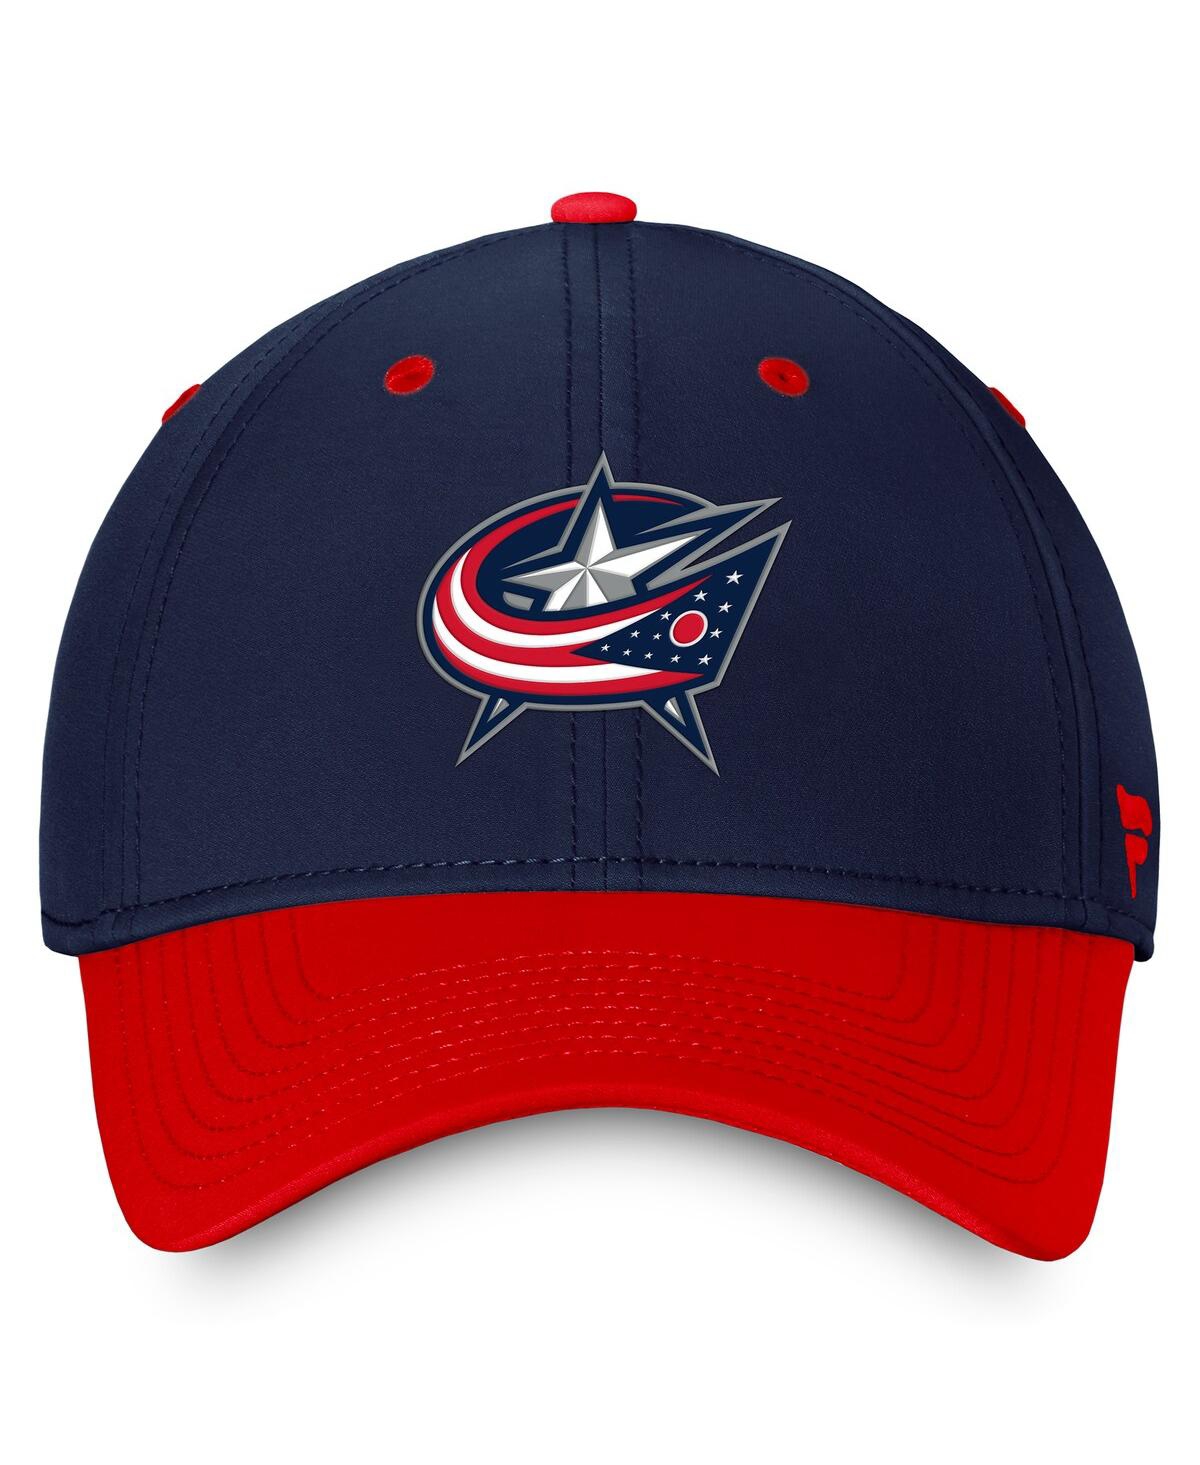 Shop Fanatics Men's  Navy, Red Columbus Blue Jackets Authentic Pro Rink Two-tone Flex Hat In Navy,red